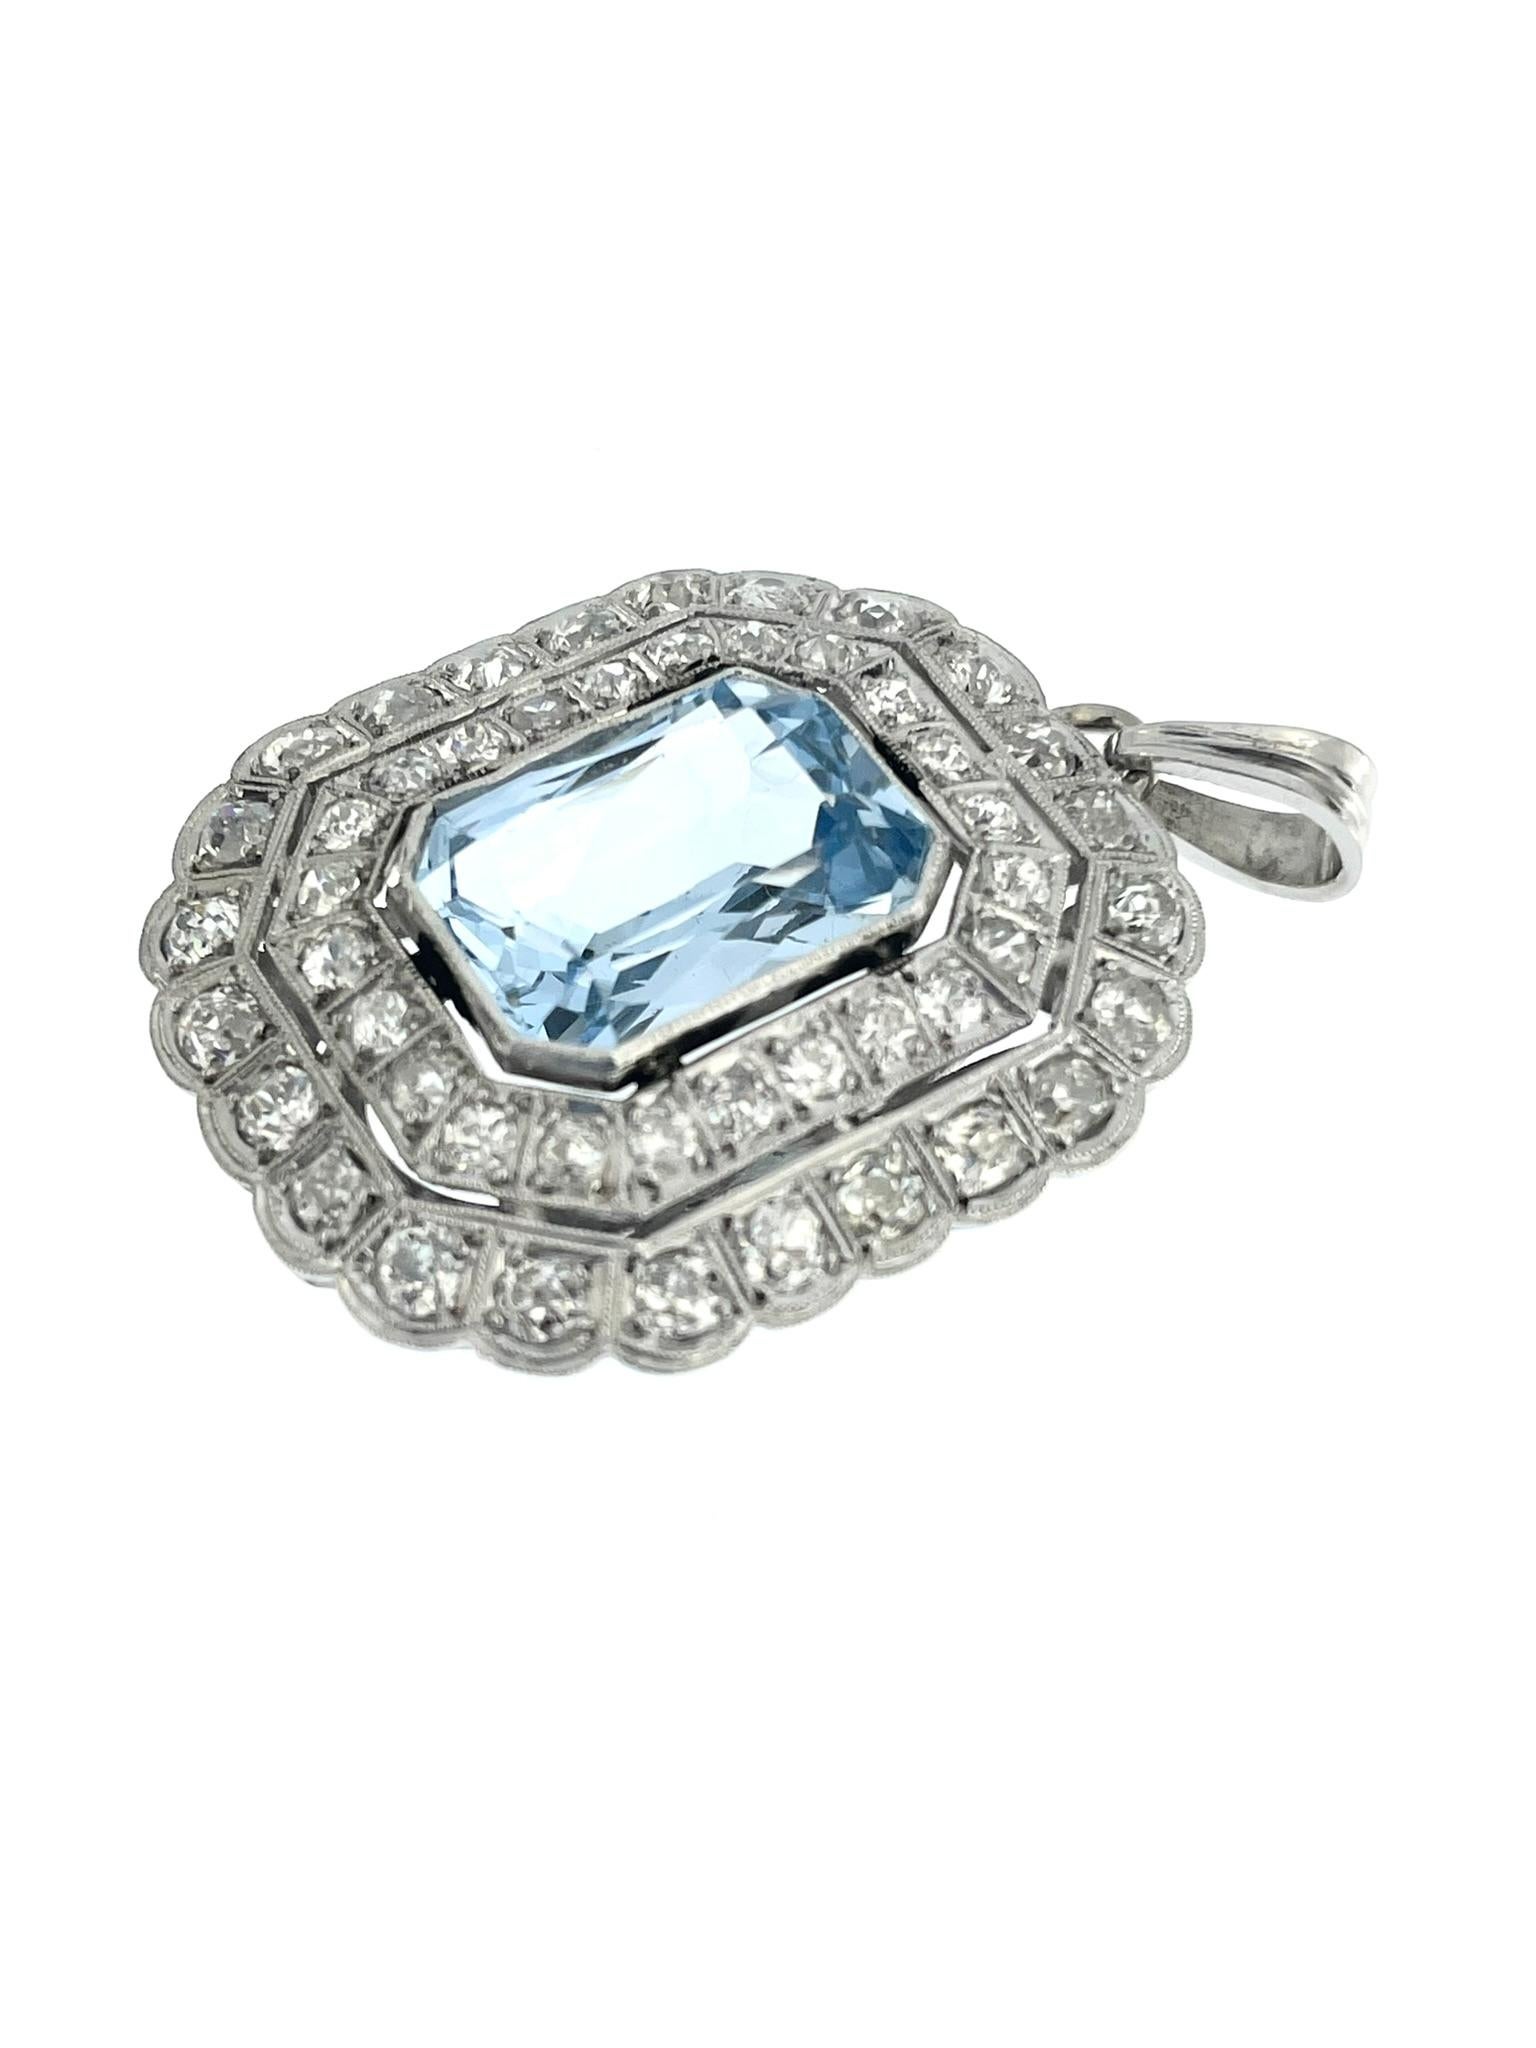 Art Deco Style White Gold Pendant with Blue Spinel and Diamonds In Excellent Condition For Sale In Esch-Sur-Alzette, LU